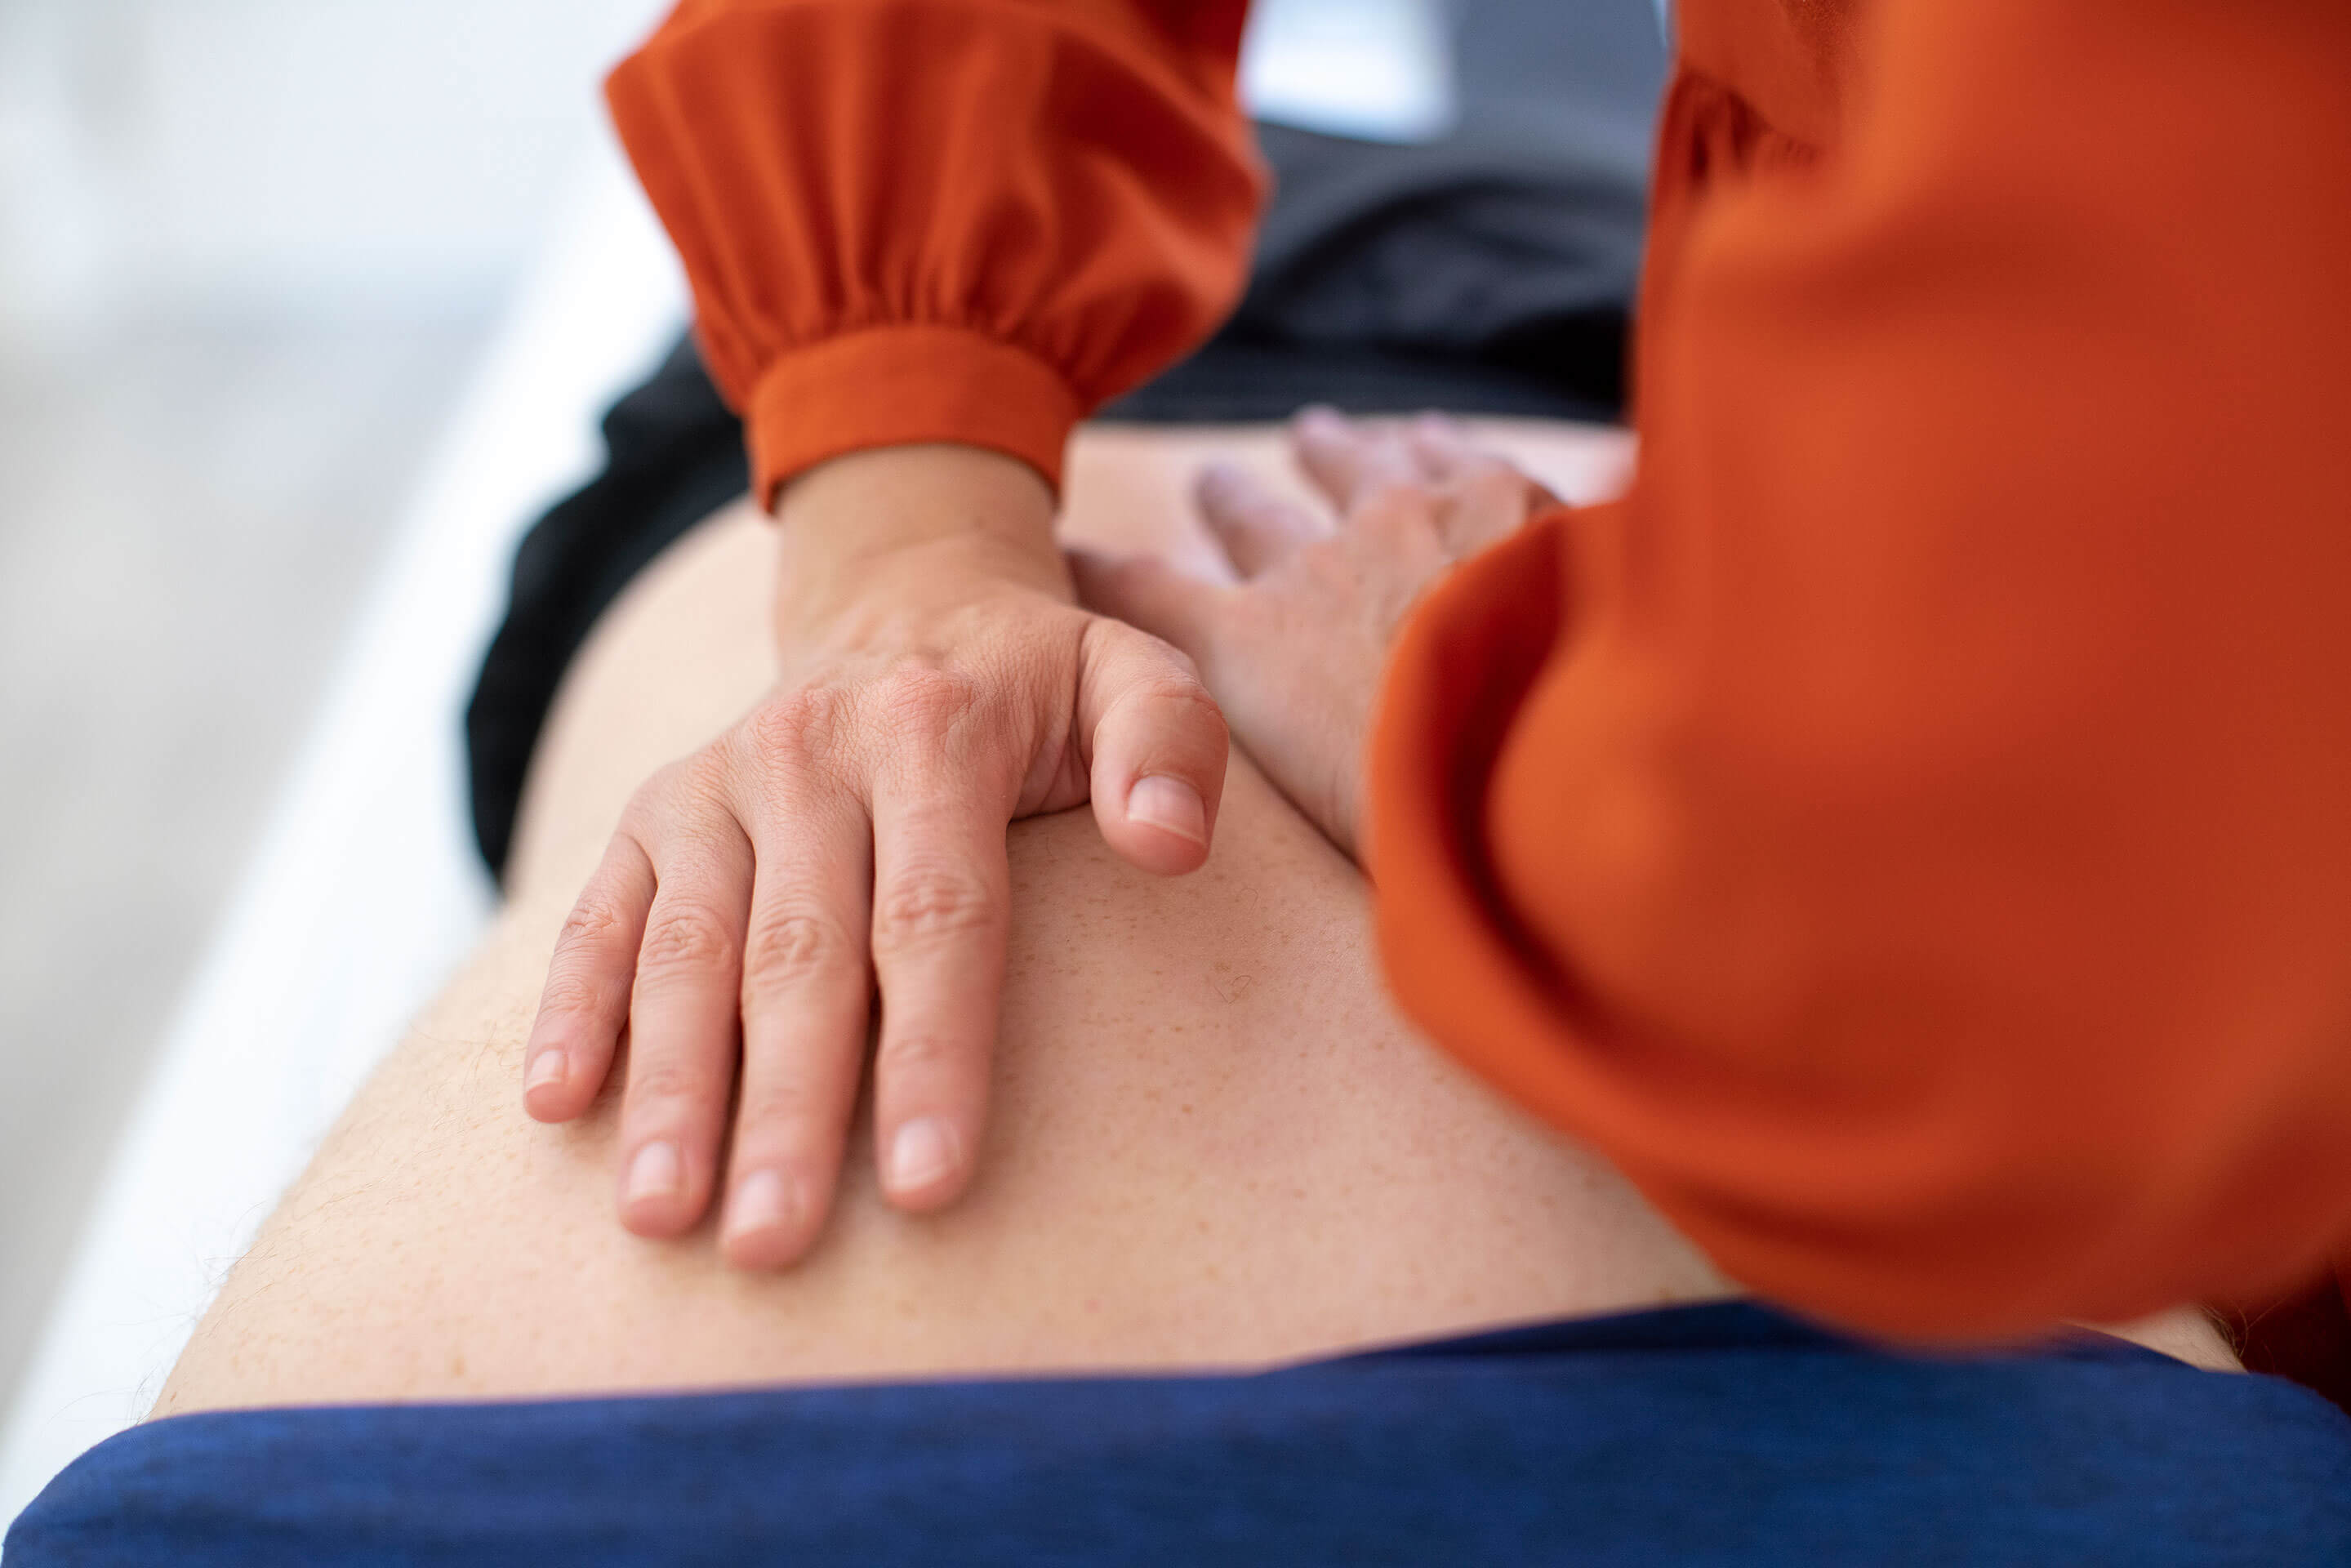 Osteopathy is especially good at treating back pain and other joint pain